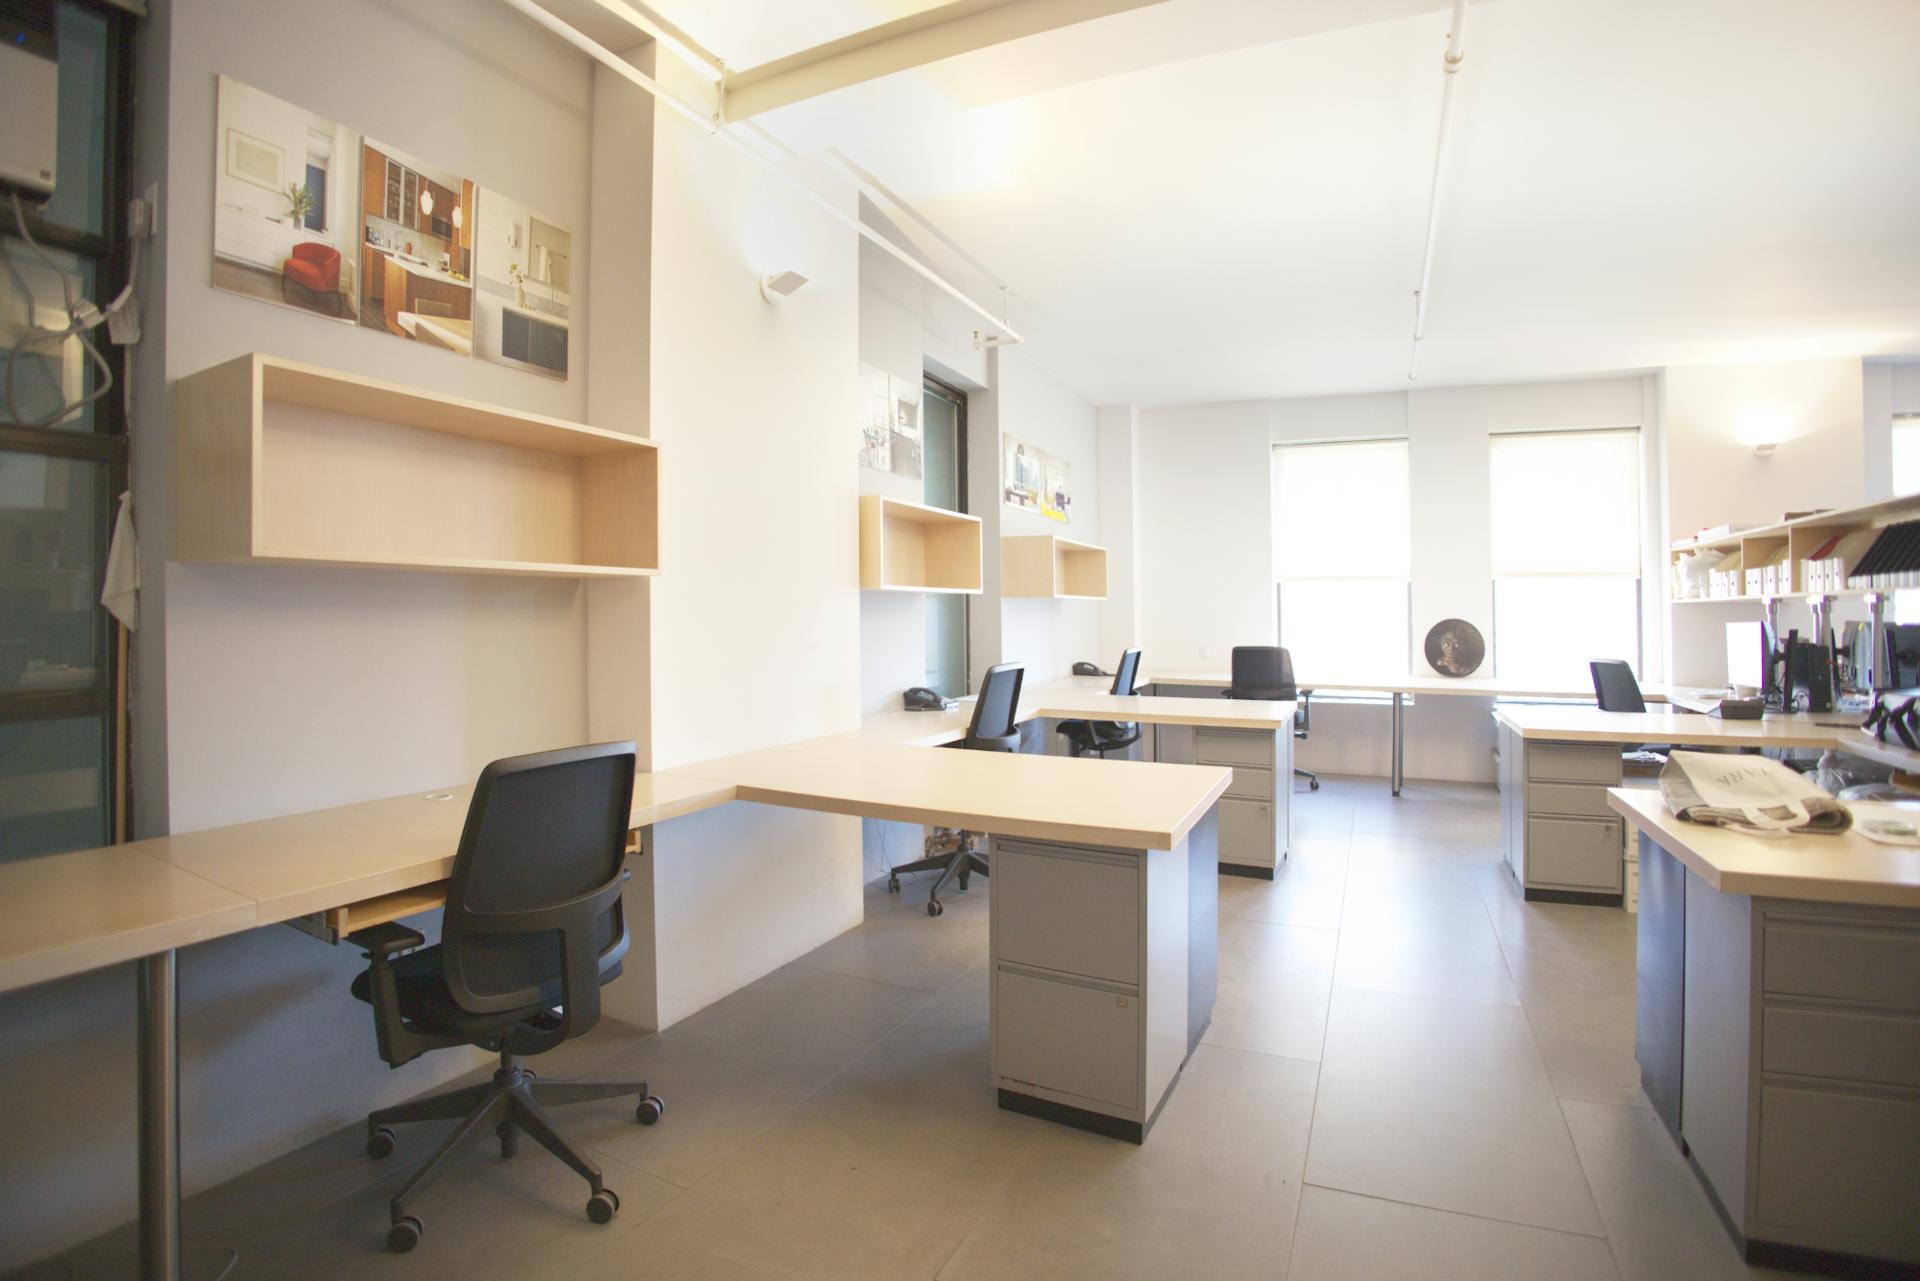 sublease architect office space | office sublets